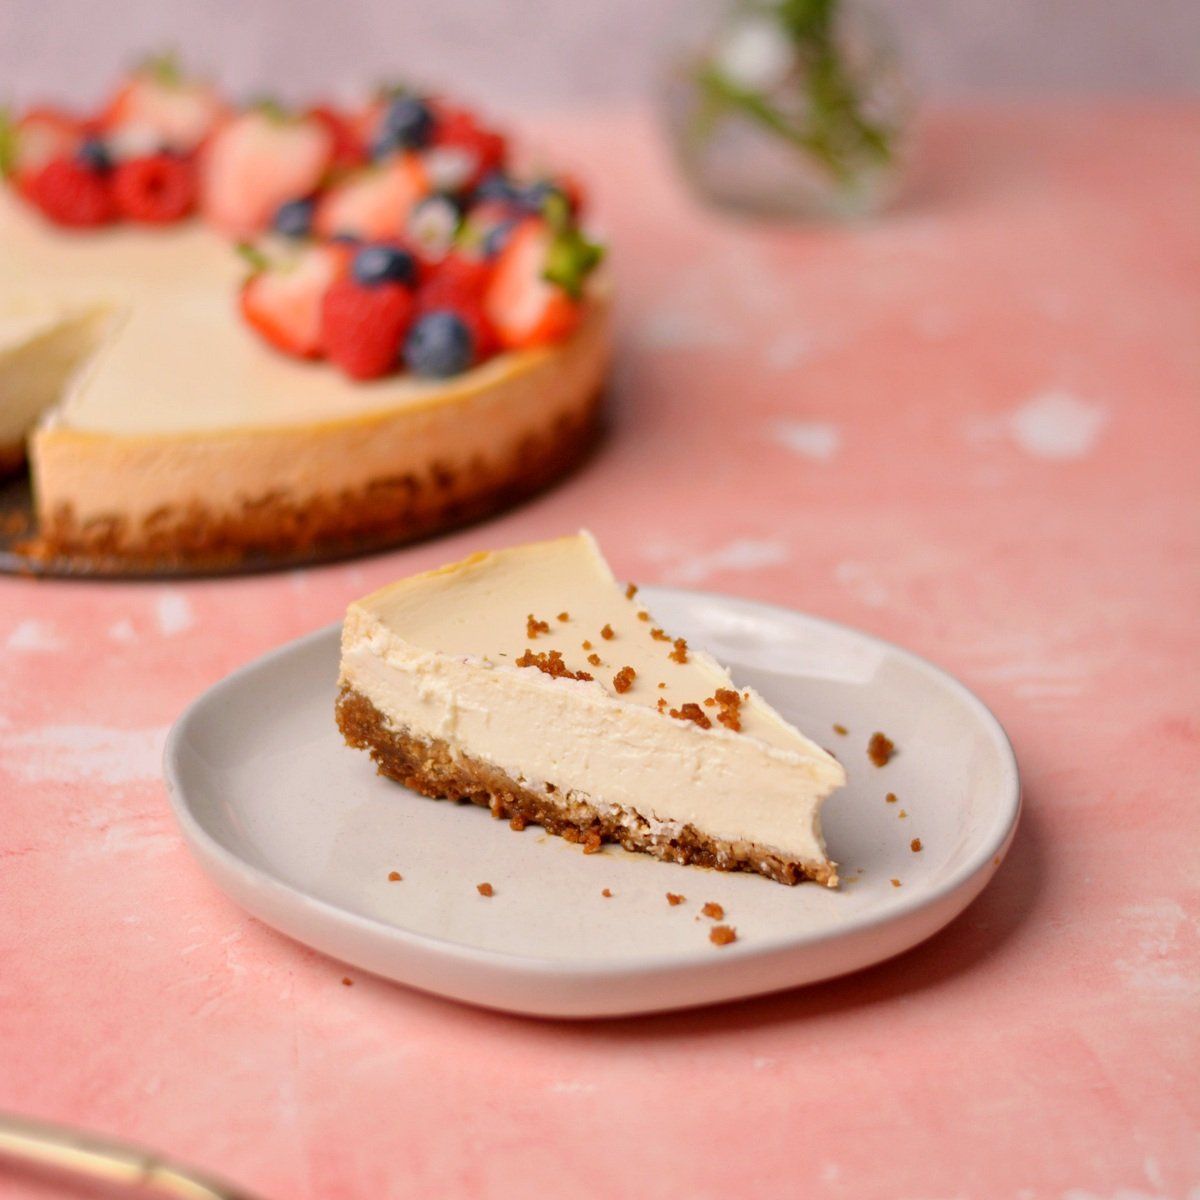 A slice of cheesecake with the full cheesecake in the background.